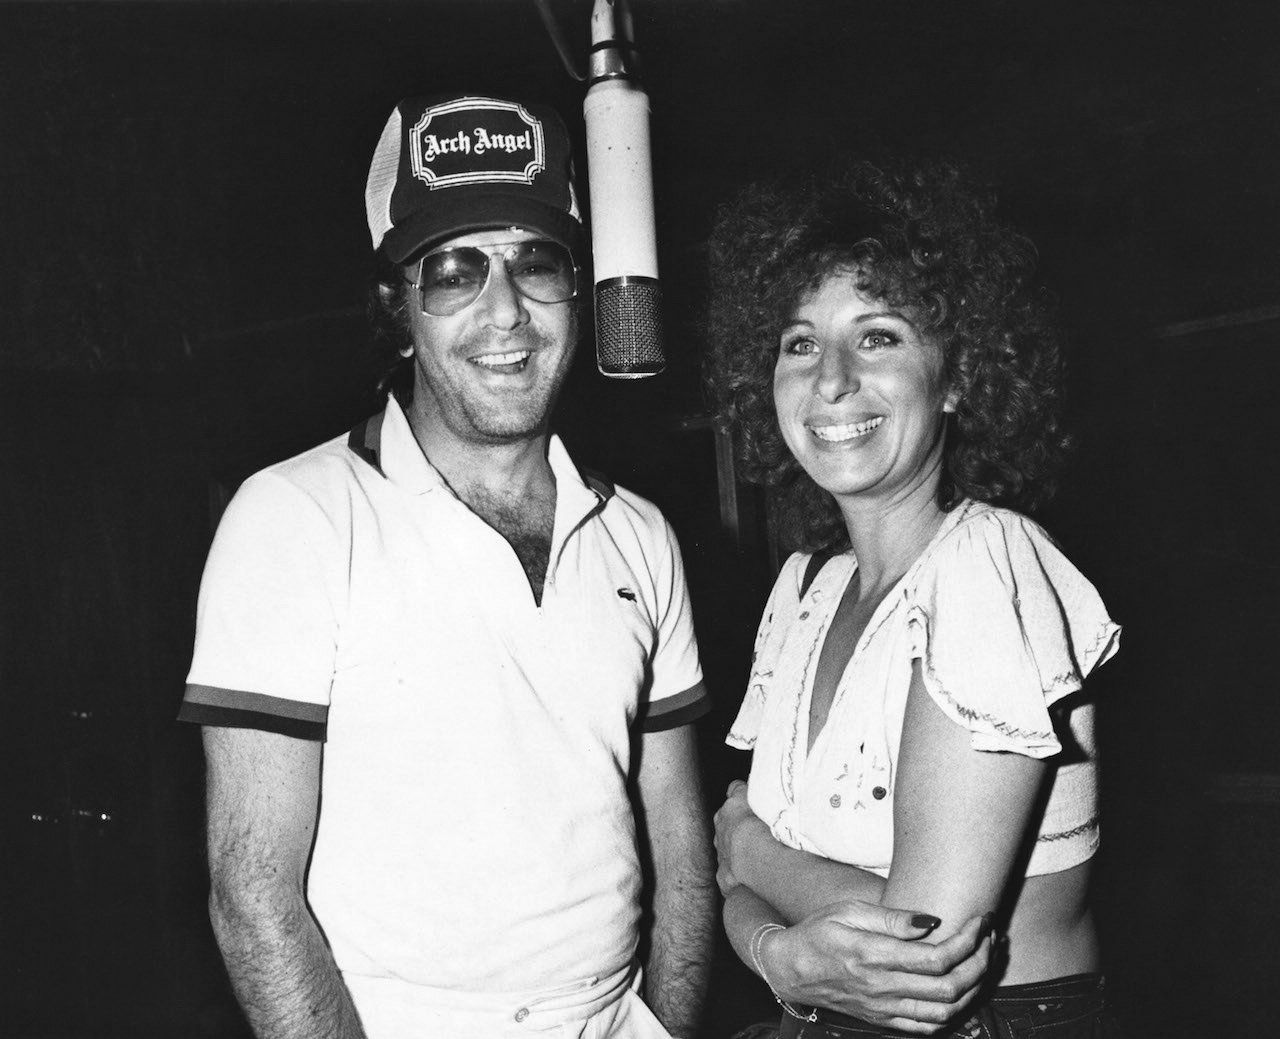 Diamond and Streisand, dressed casual, record their duet in 1978.